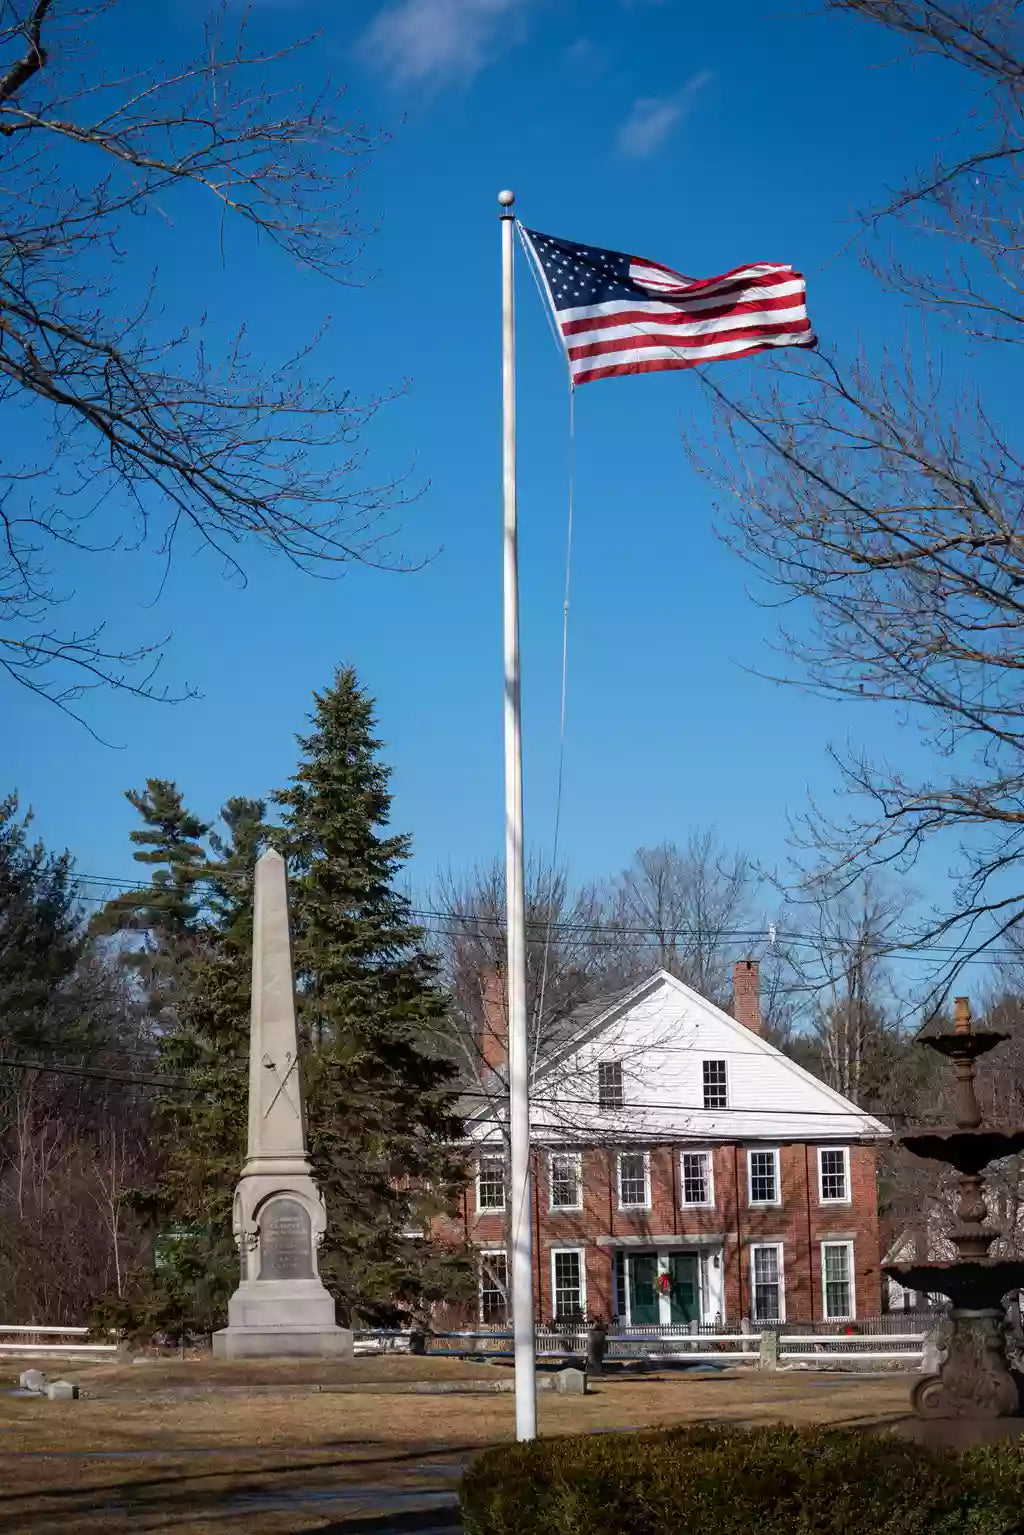 Commercial Fiberglass (20'-40'), part of the fiberglass flagpole collection from Liberty Flagpoles